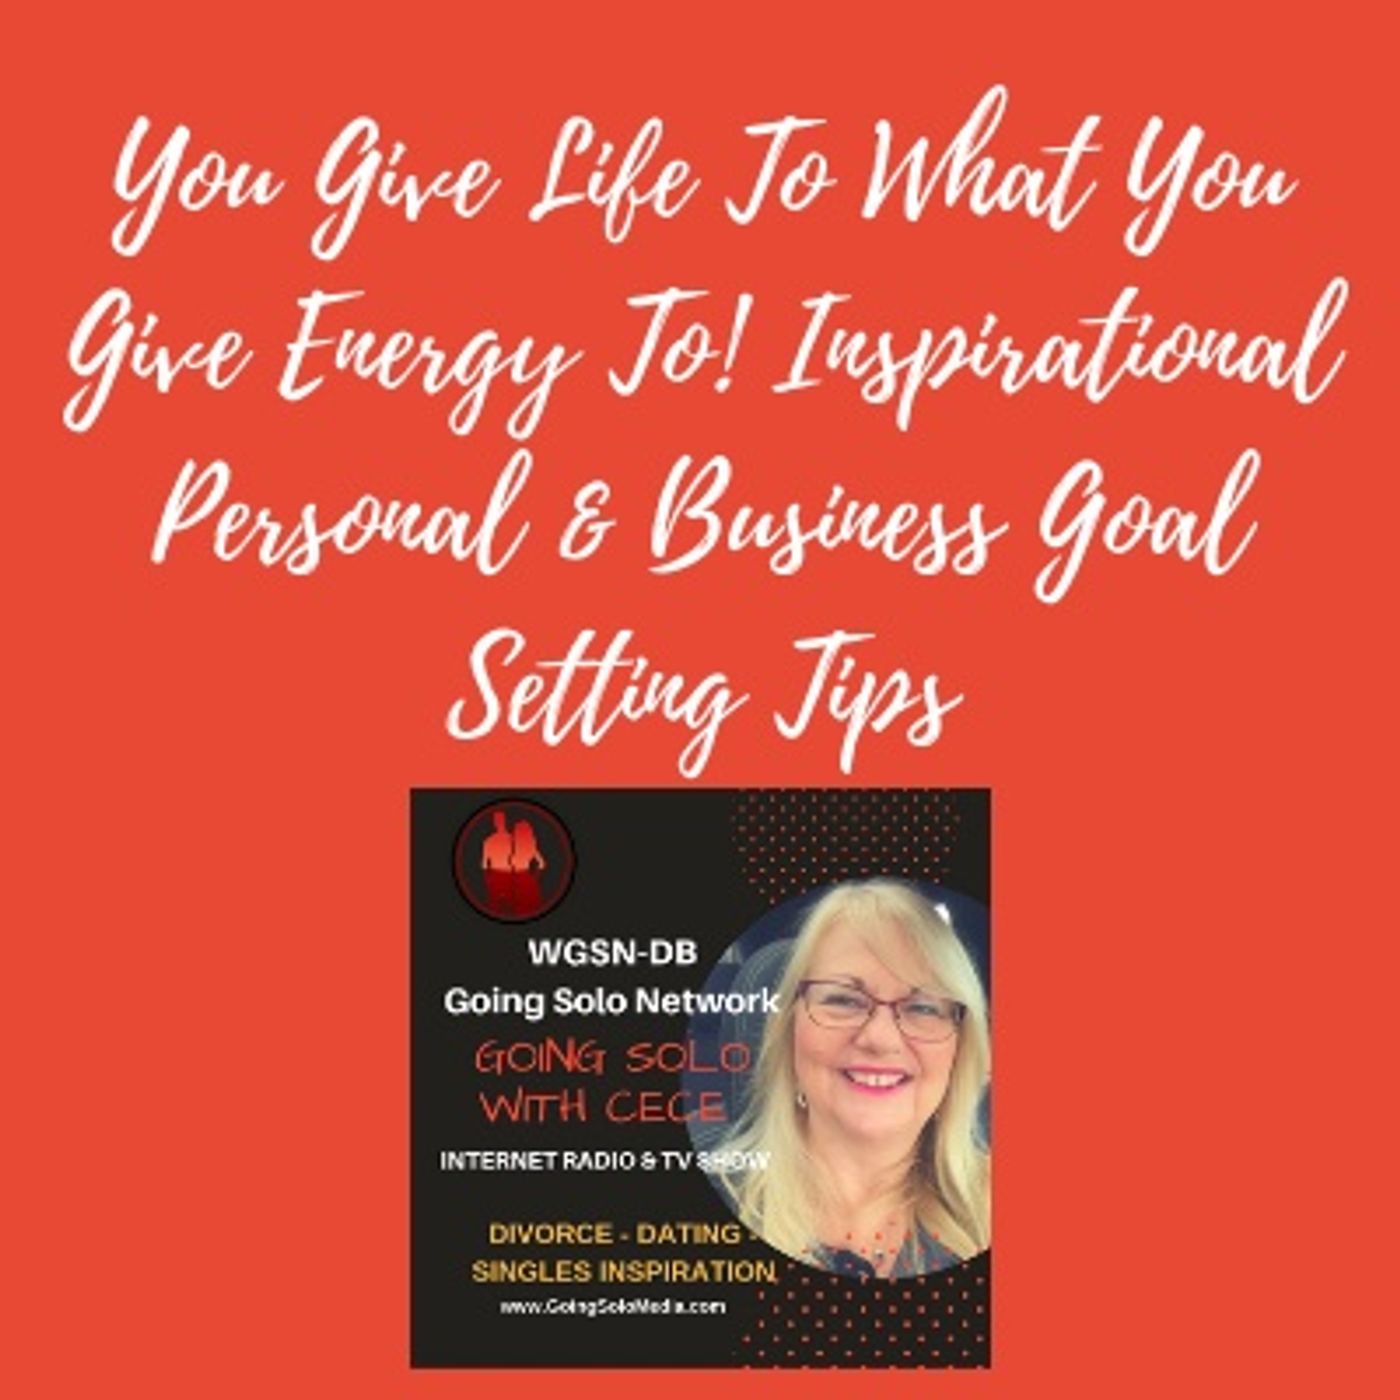 You Give Life To  What You Give Energy To! Inspirational Personal & Business Goal Setting Tips